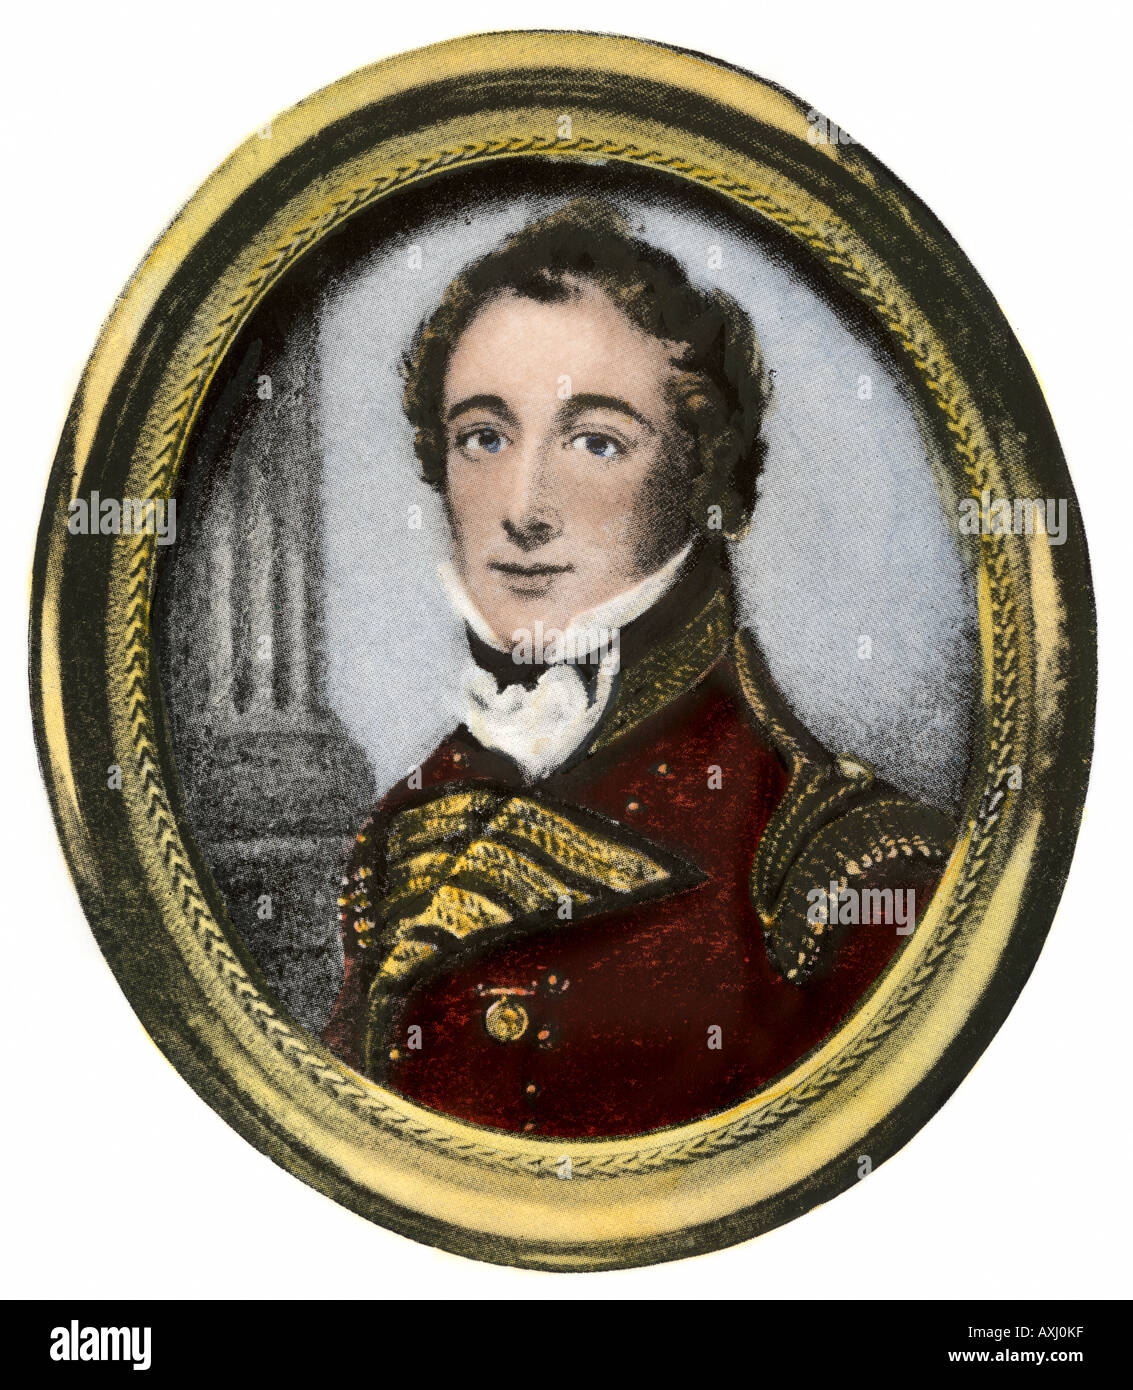 Isaac Brock British commander of Upper Canada at the start of the War of 1812. Hand-colored halftone of a portrait Stock Photo